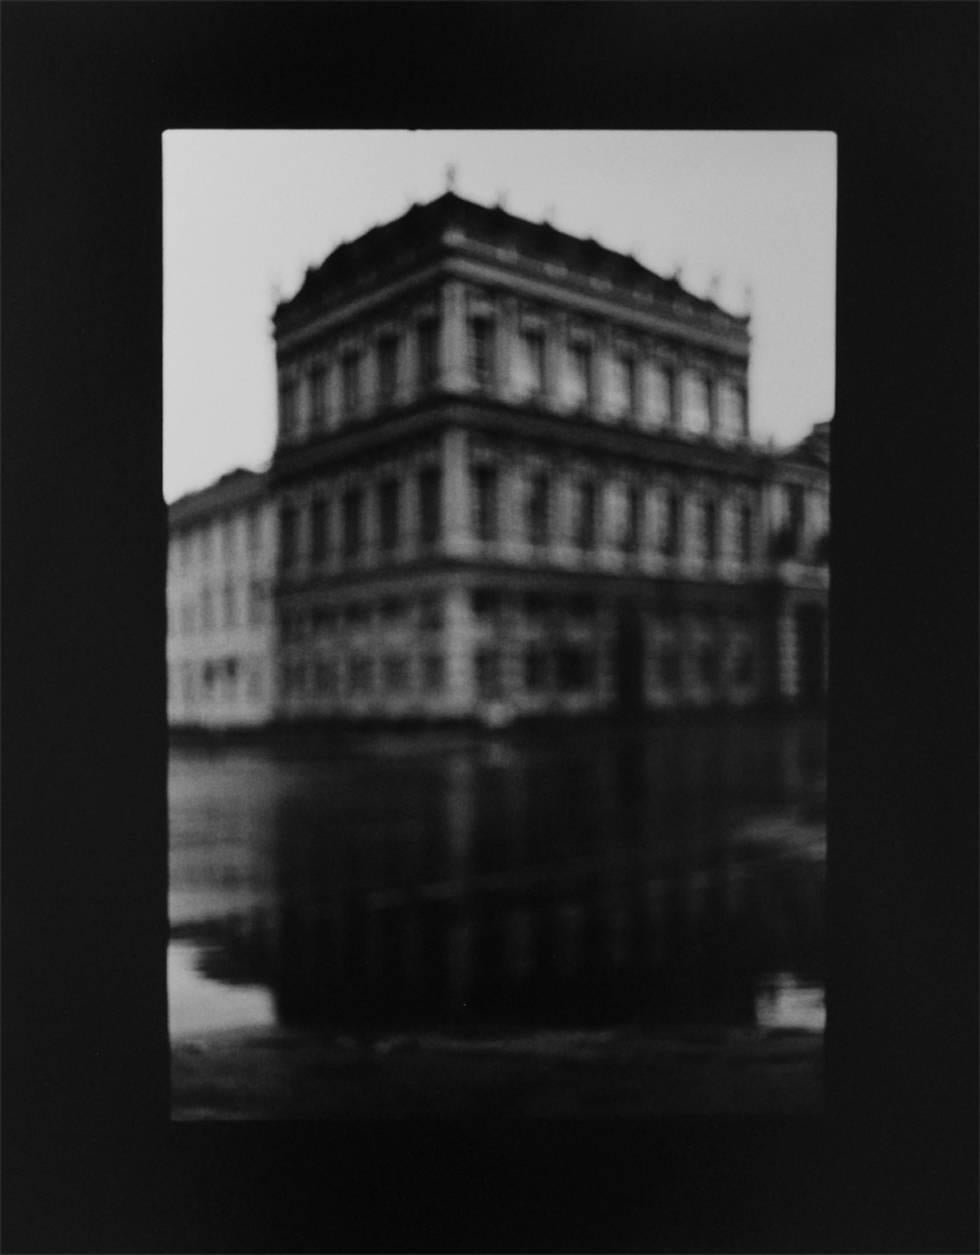 David Armstrong Black and White Photograph - Building, Potsdam